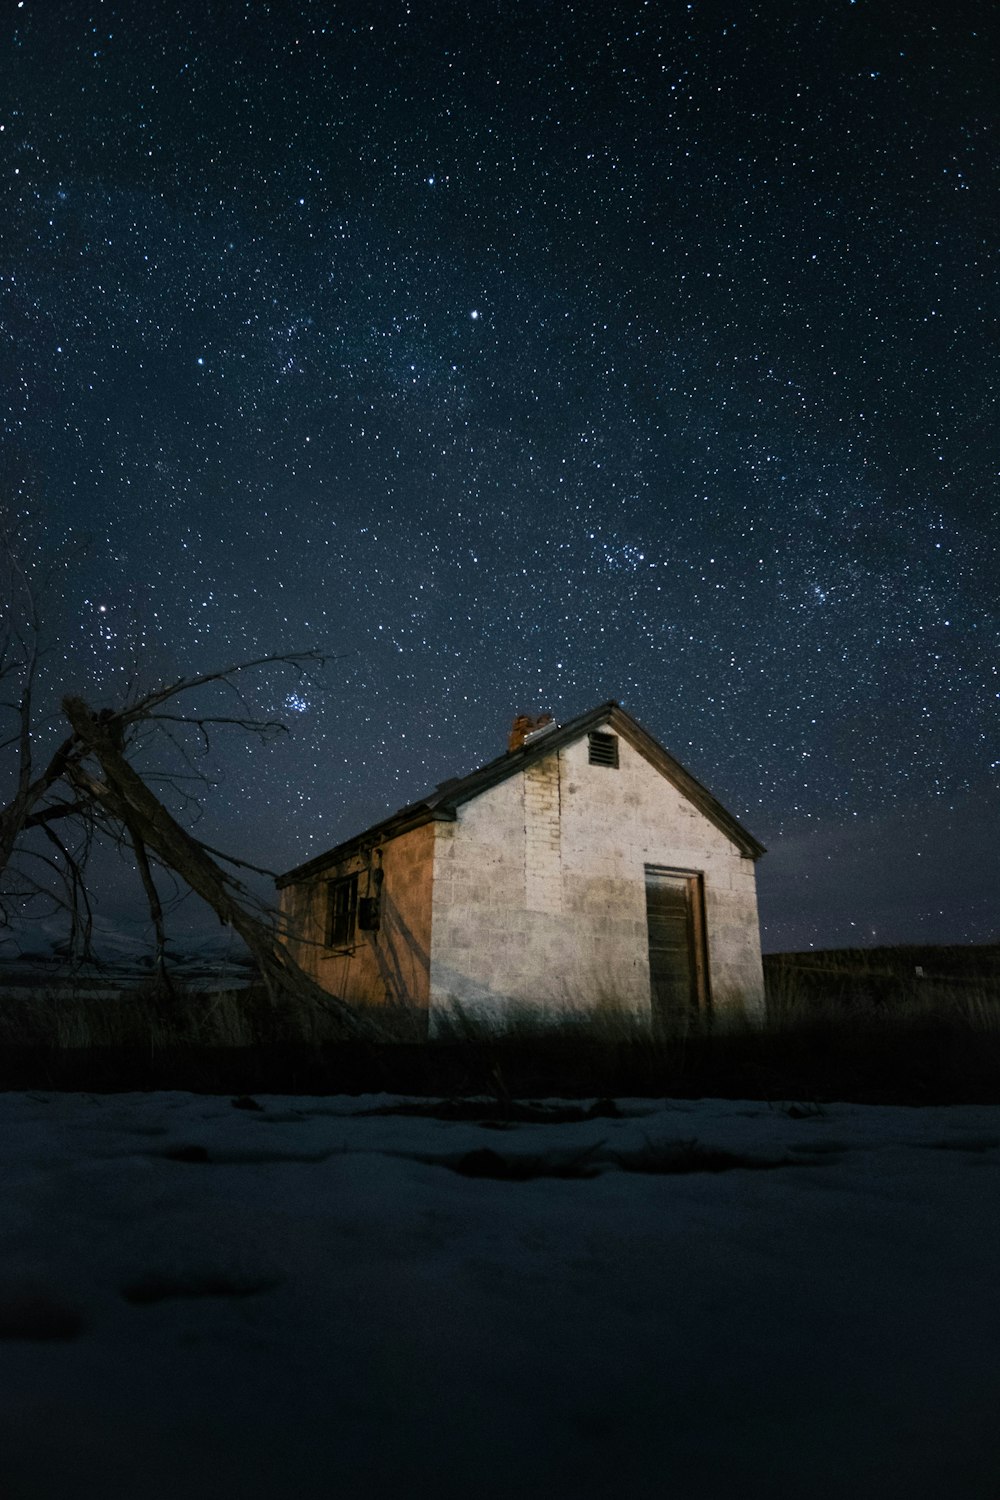 house under clear sky full of stars at night